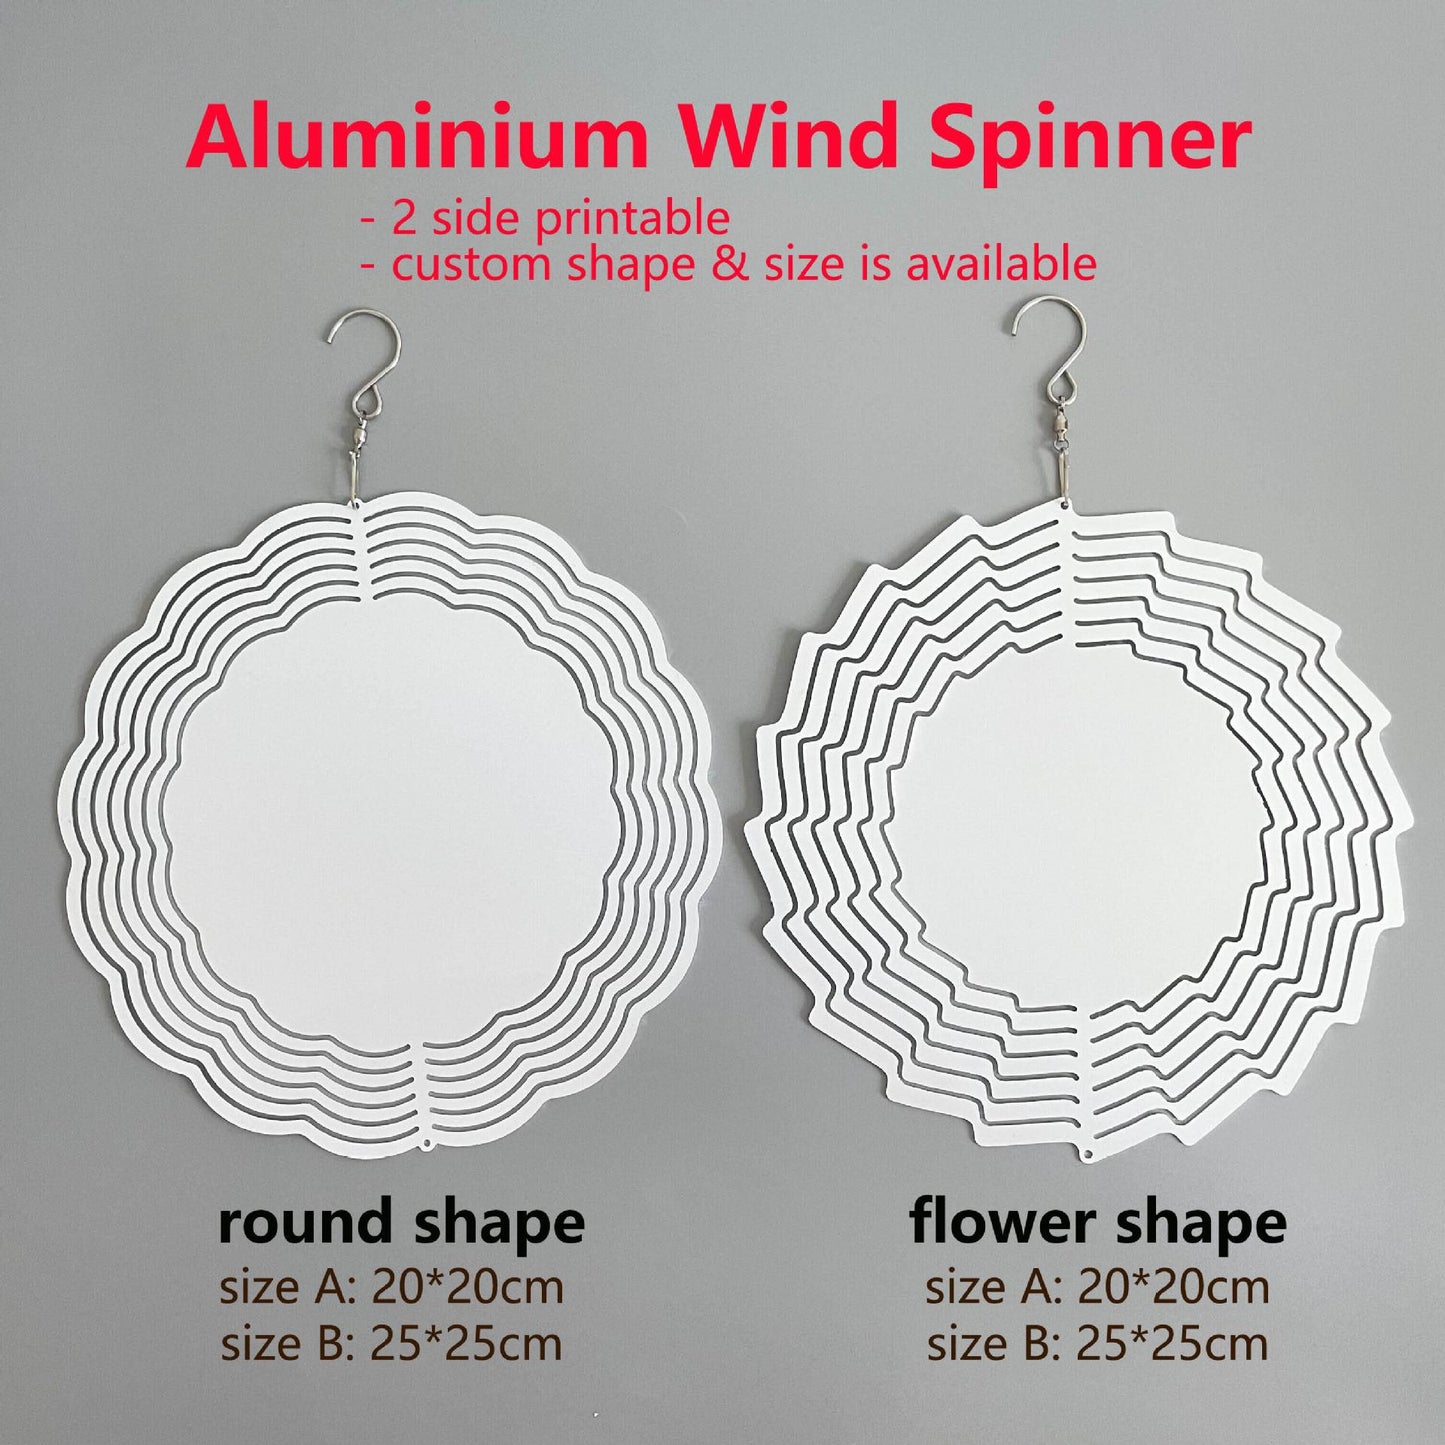 How to Make Custom Sublimation Wind Spinners 